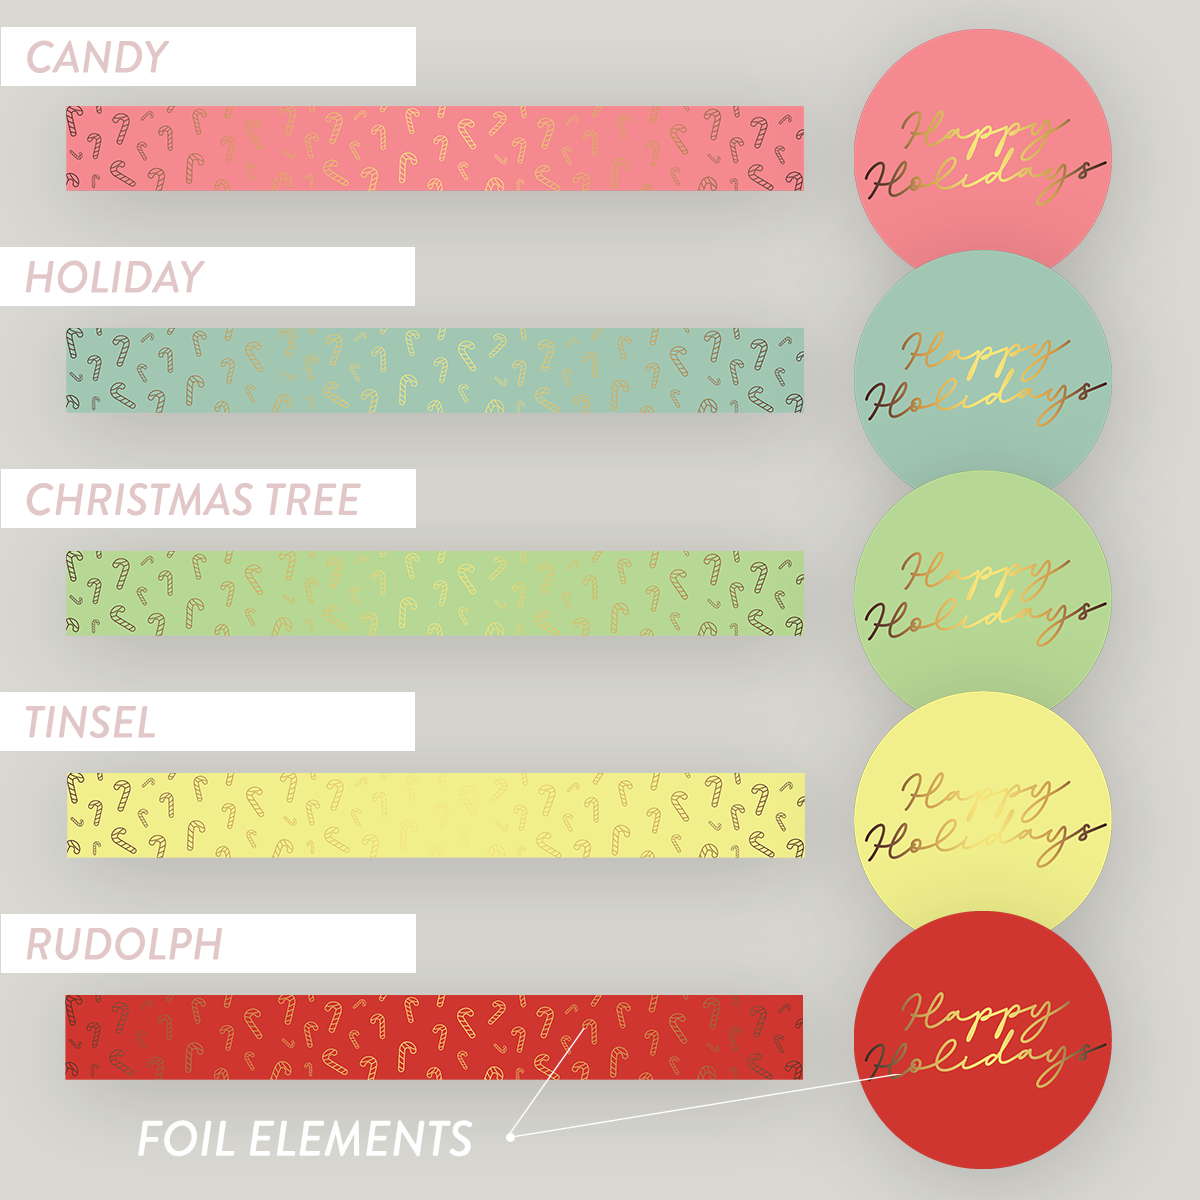 FOILED The Jewel Christmas Collection - Happy Holidays Candy Canes Travel Tin Set Festive Pastels